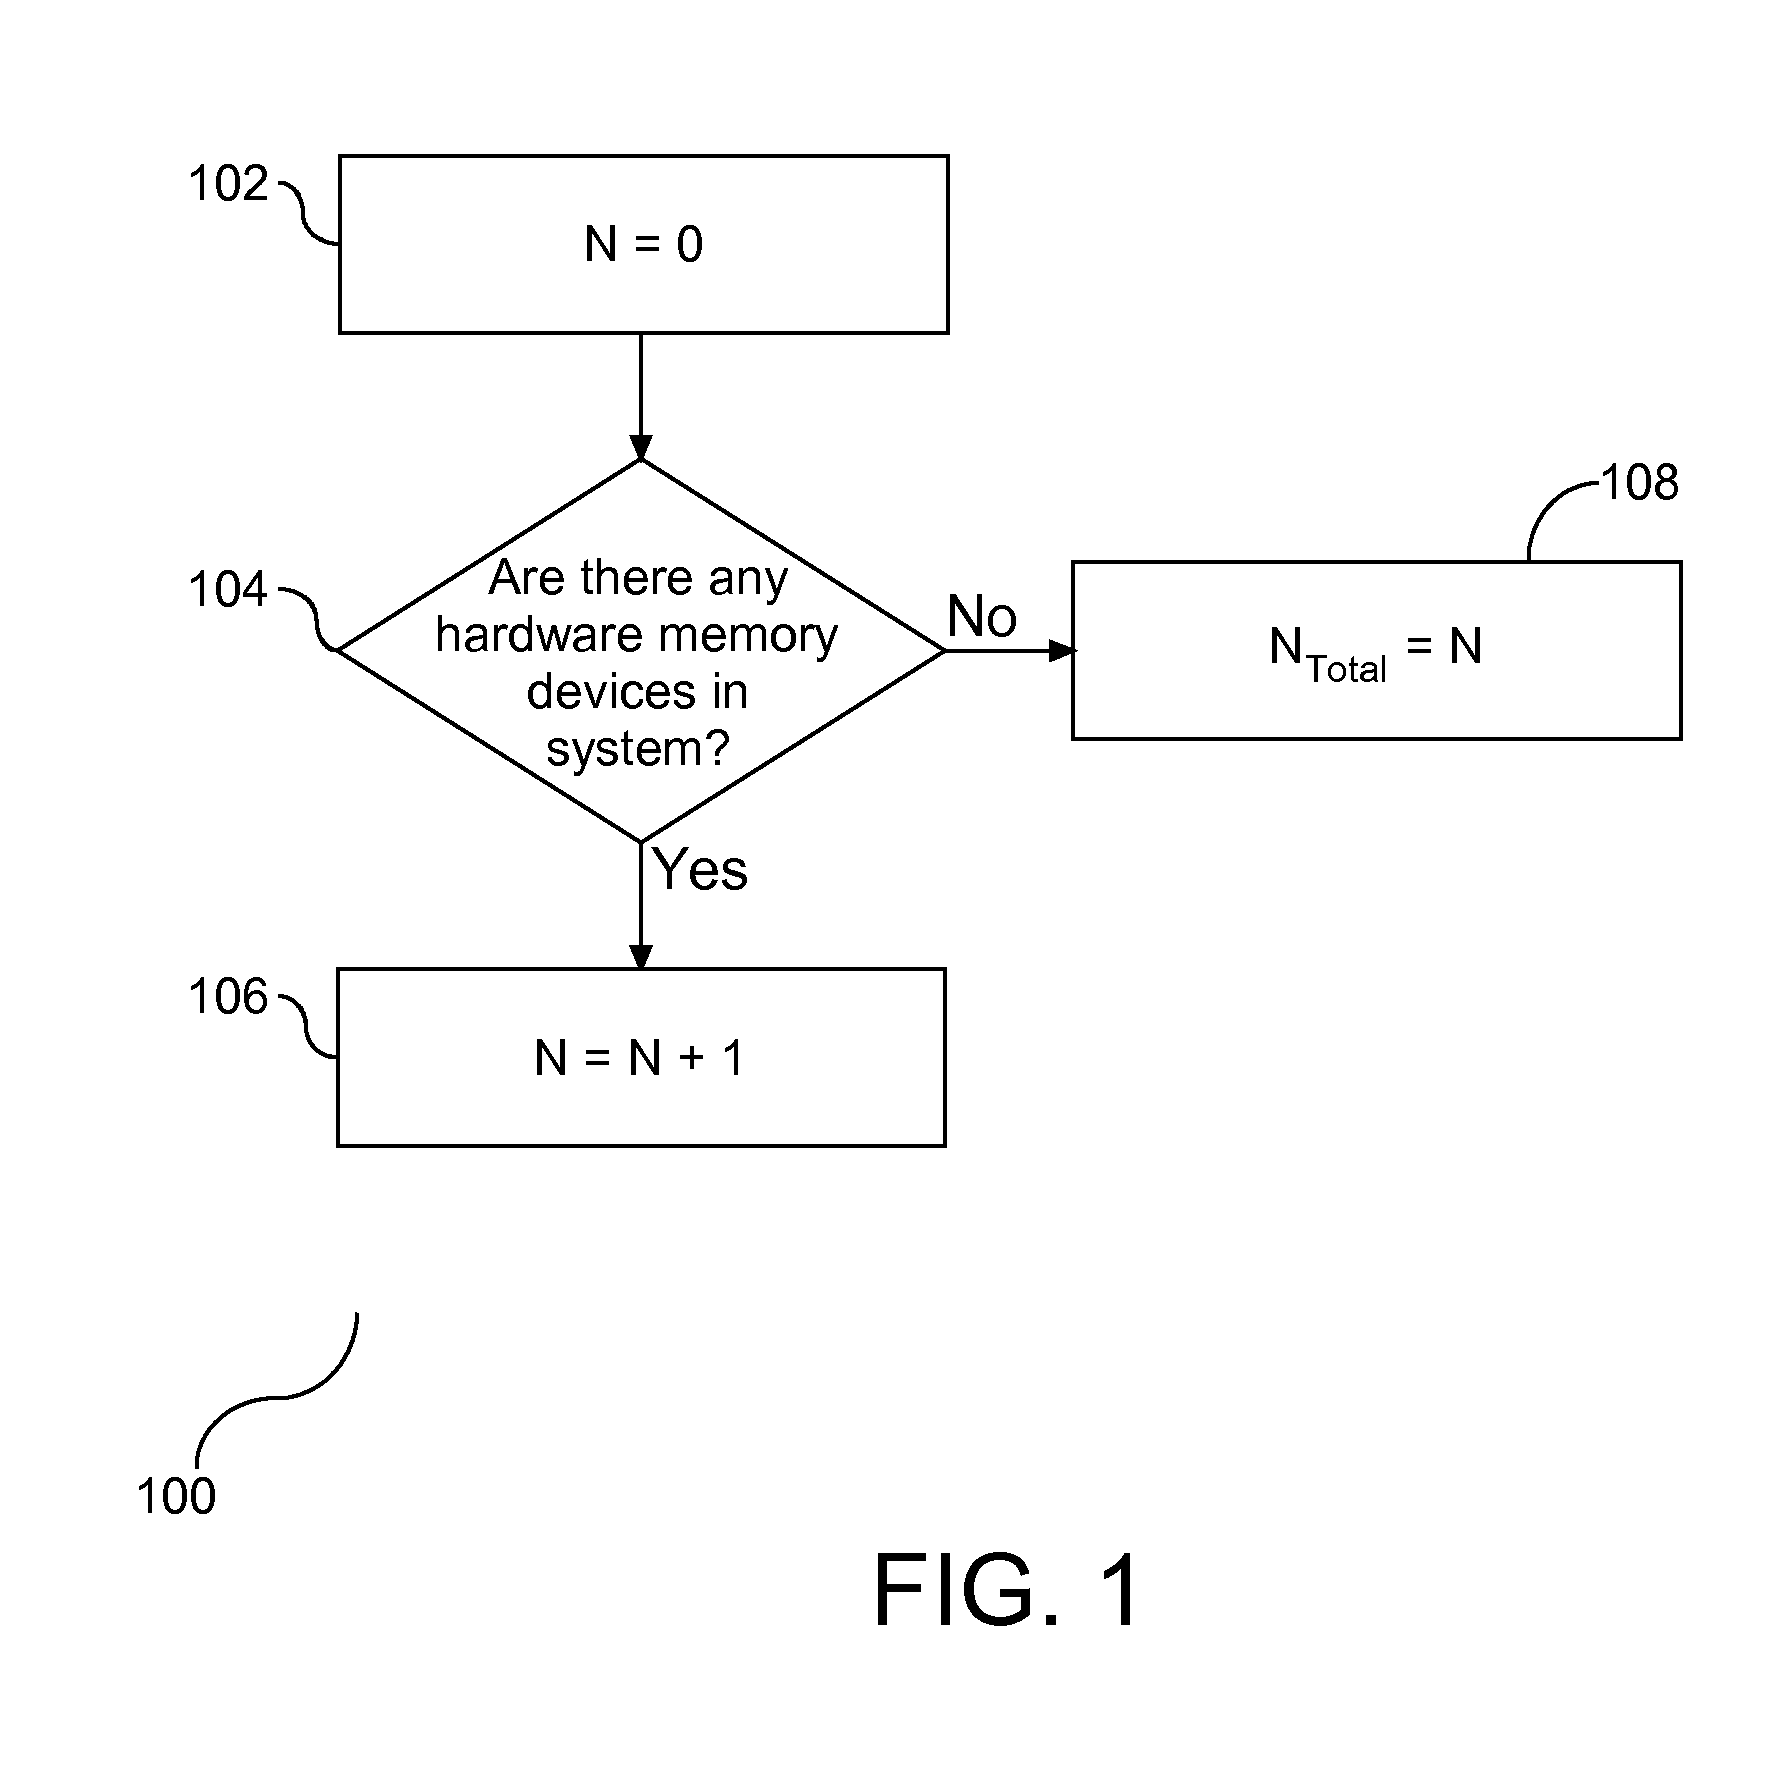 Apparatus and Method for Selective Power Reduction of Memory Hardware